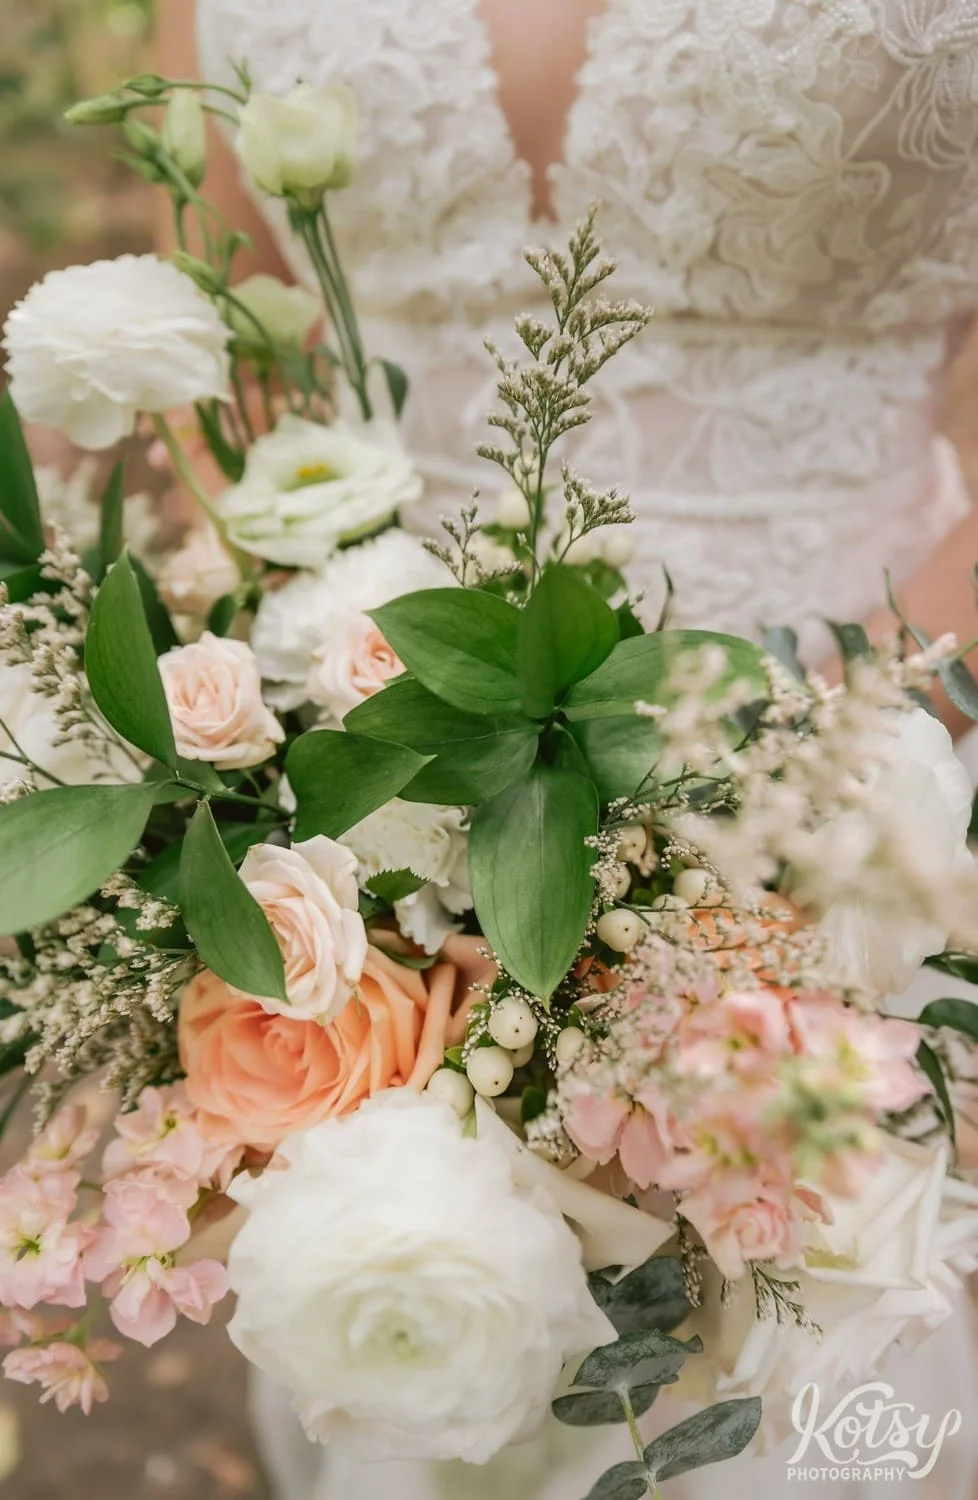 A close up shot of a flower bouquet held by a bride wearing a white bridal gown